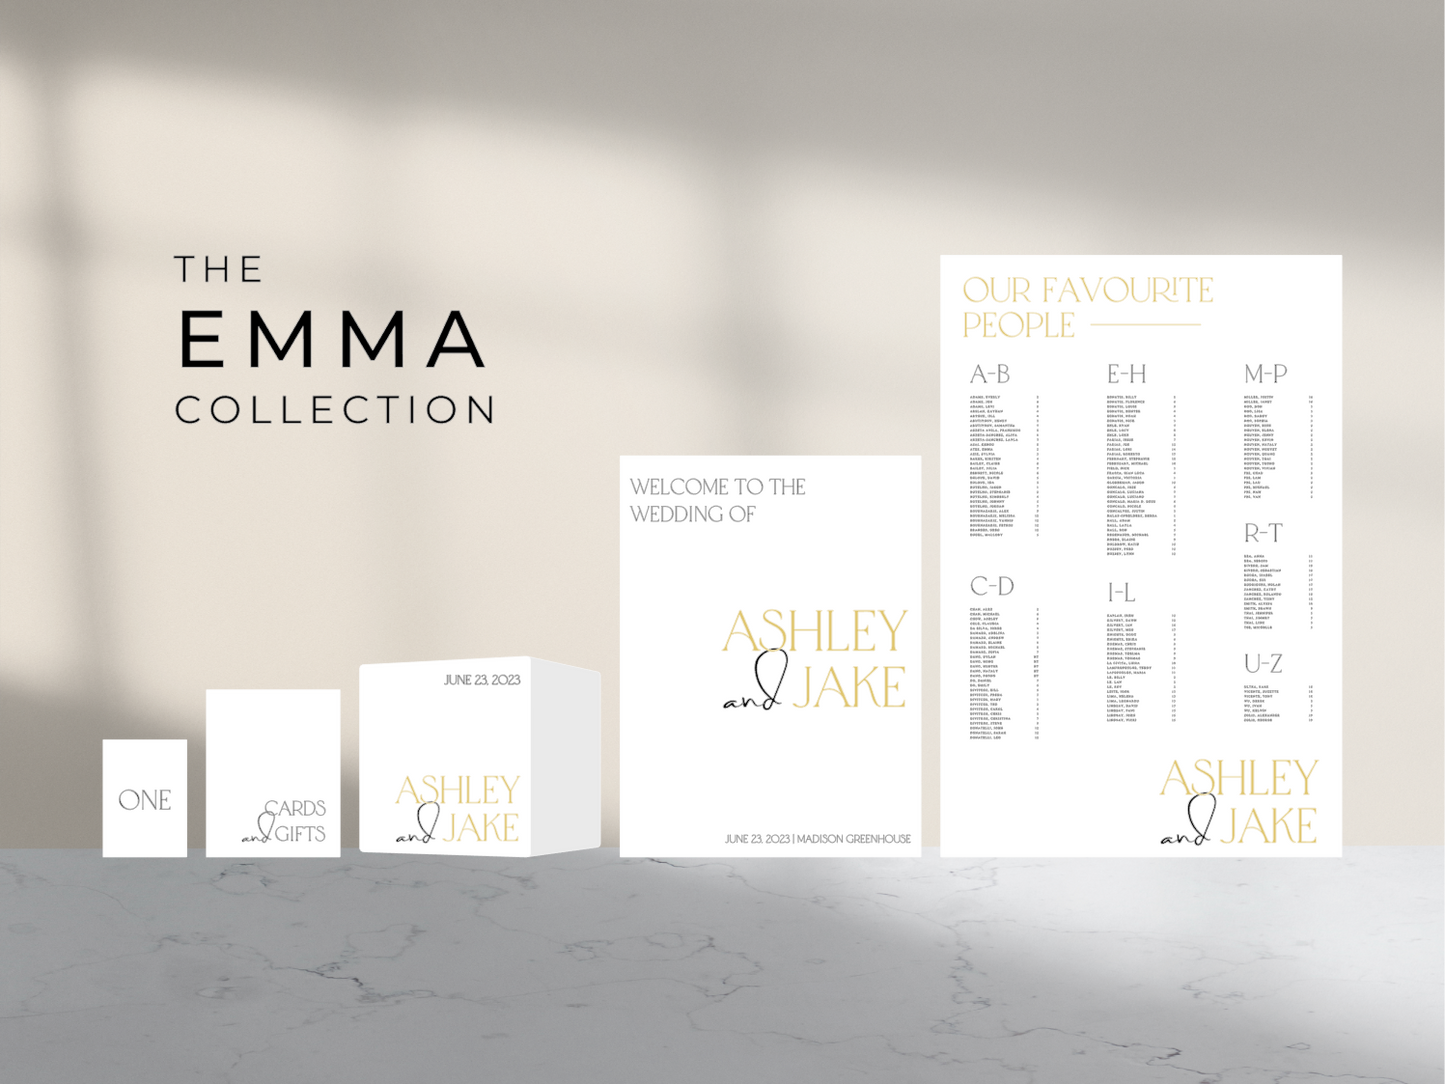 Seating Chart | The EMMA